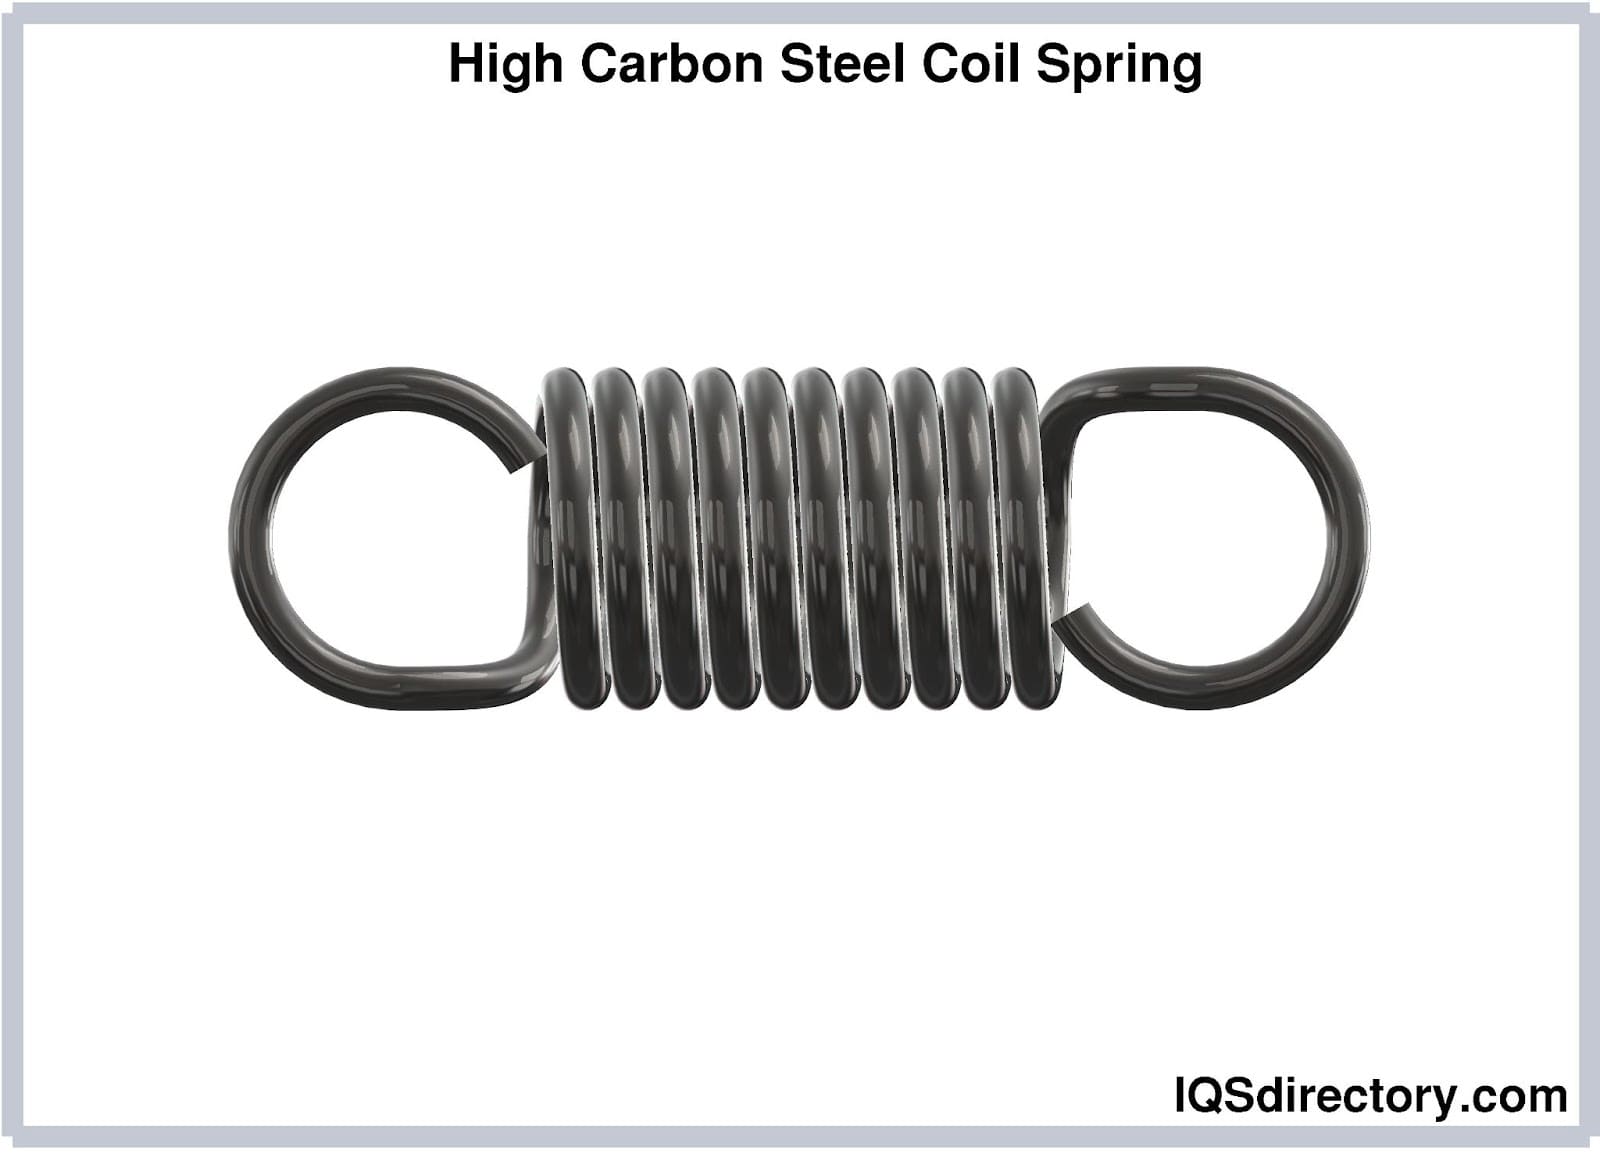 High Carbon Steel Coil Spring